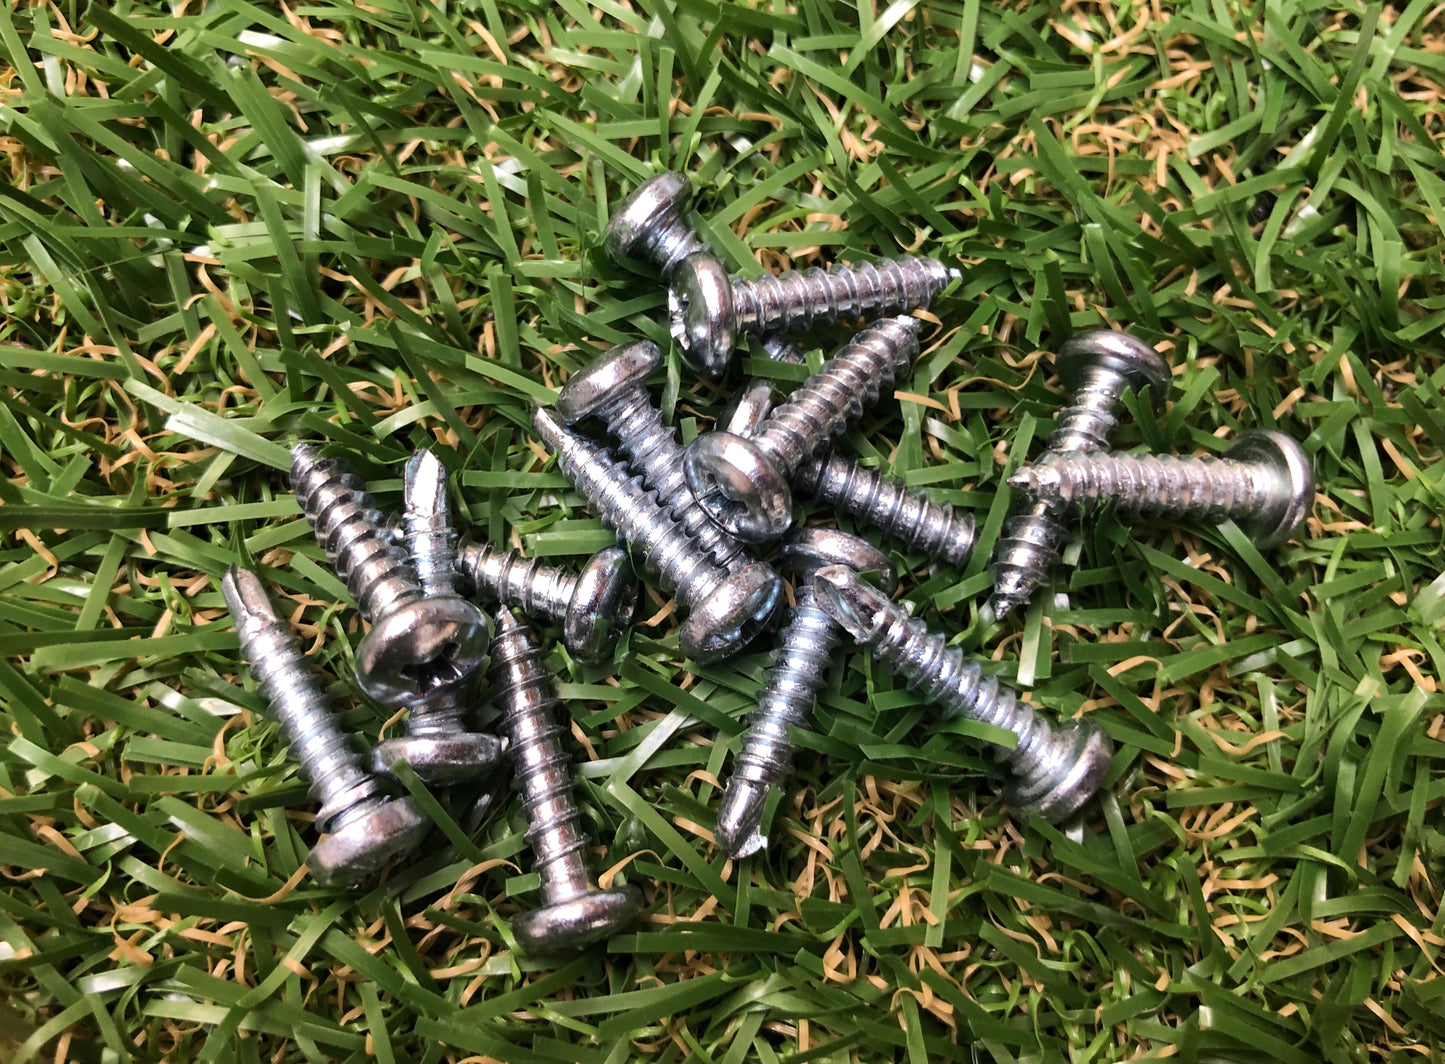 Replacement screw for lacrosse sticks! (Comes as 2 screws)